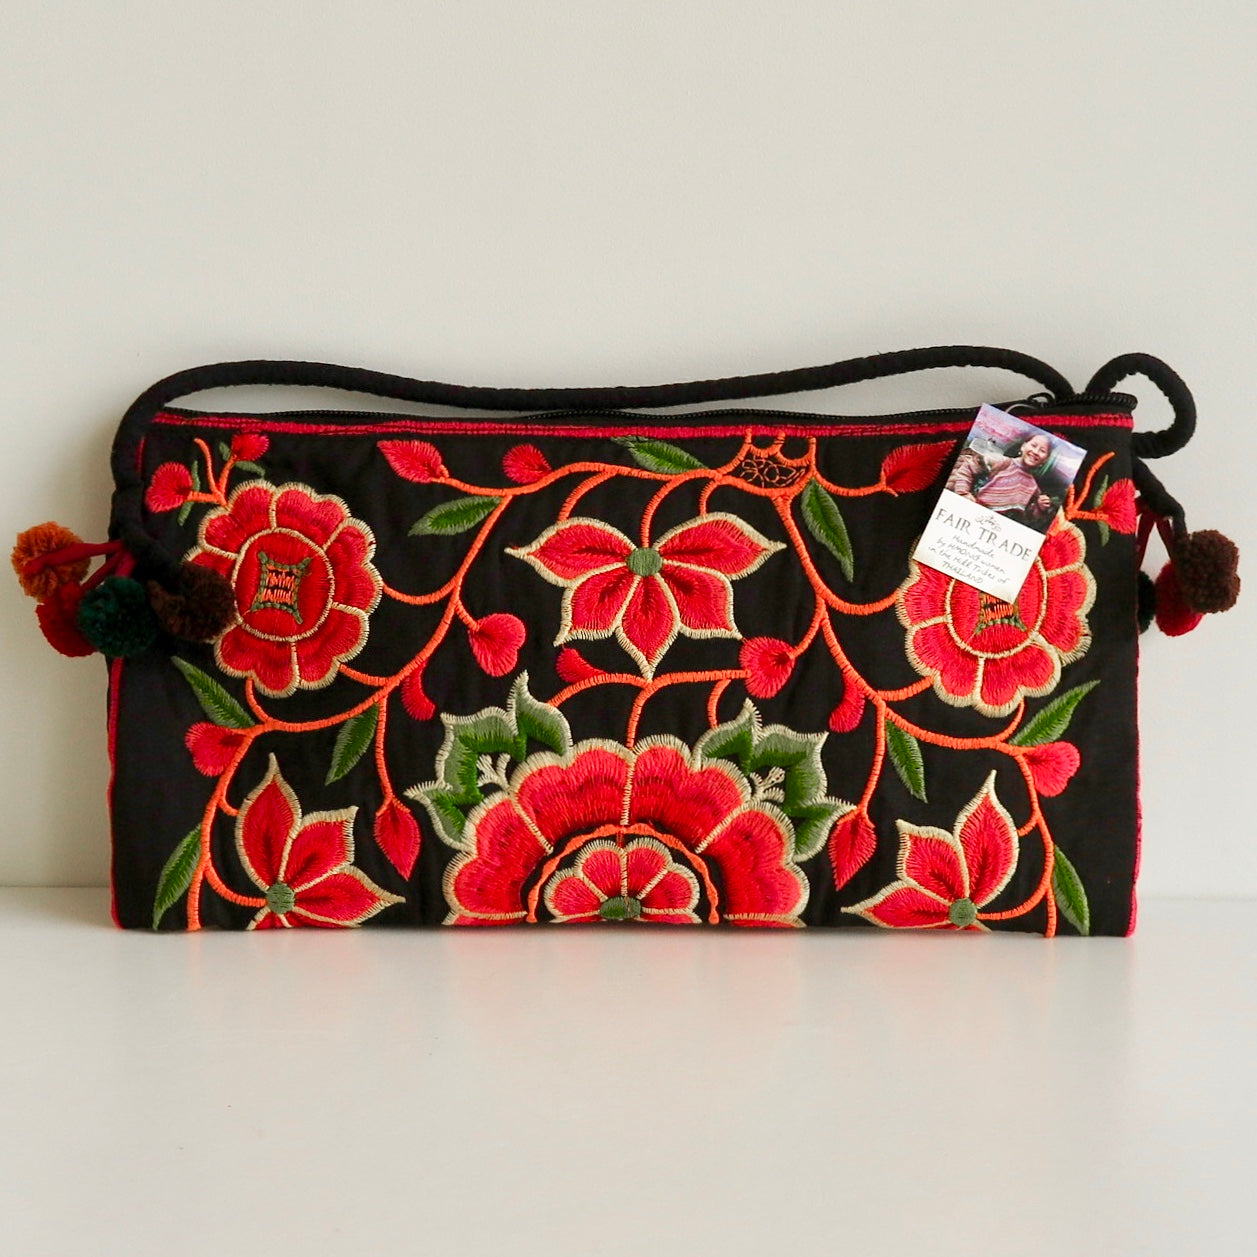 Hmong Embroidered, Cross Body Bag - Nomad Designs Online